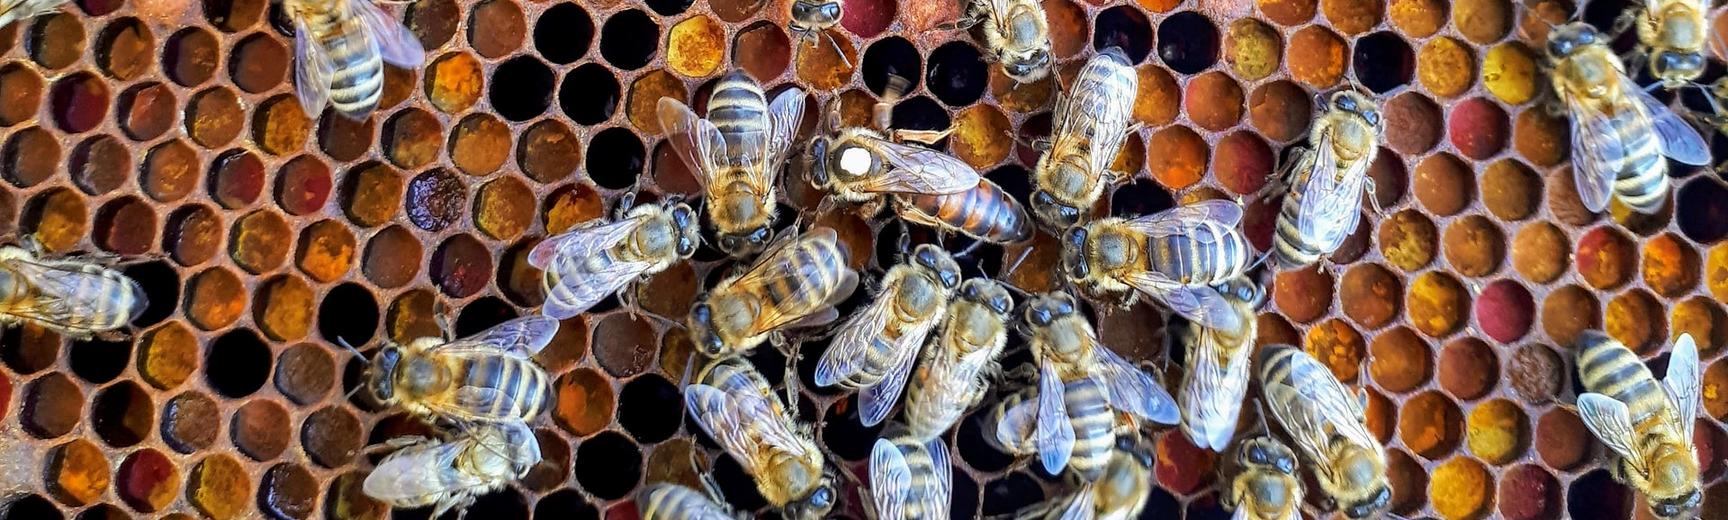 Image of bees taken by Boba Jaglicic